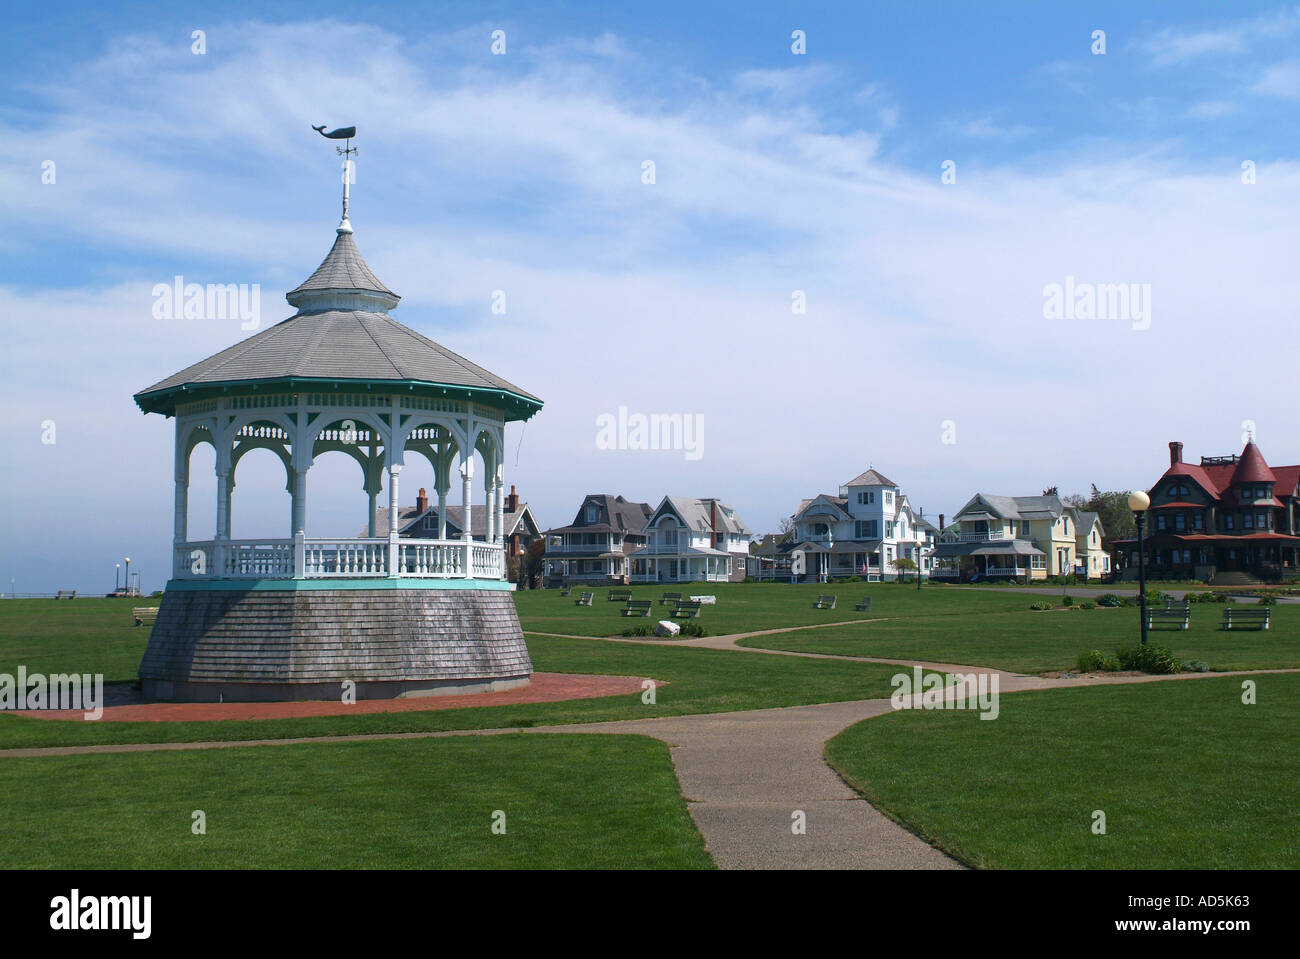 Oak Bluffs Martha's Vineyard center of green with bandstand pavilion and sidewalks Stock Photo